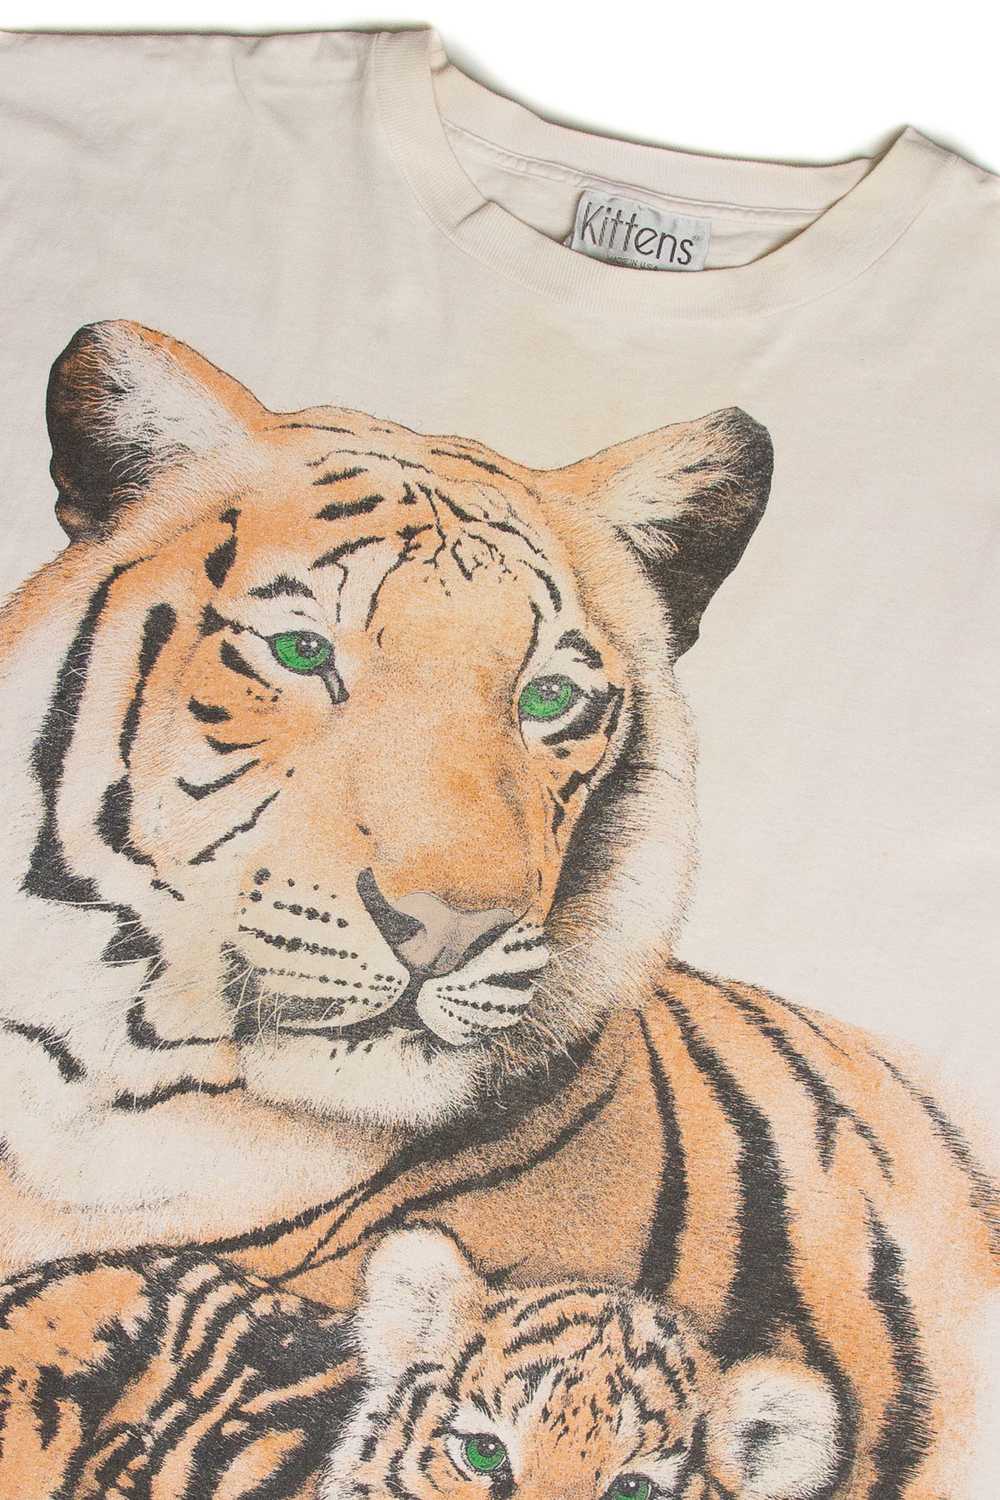 Vintage Tiger and Cub Graphic T-Shirt - image 2